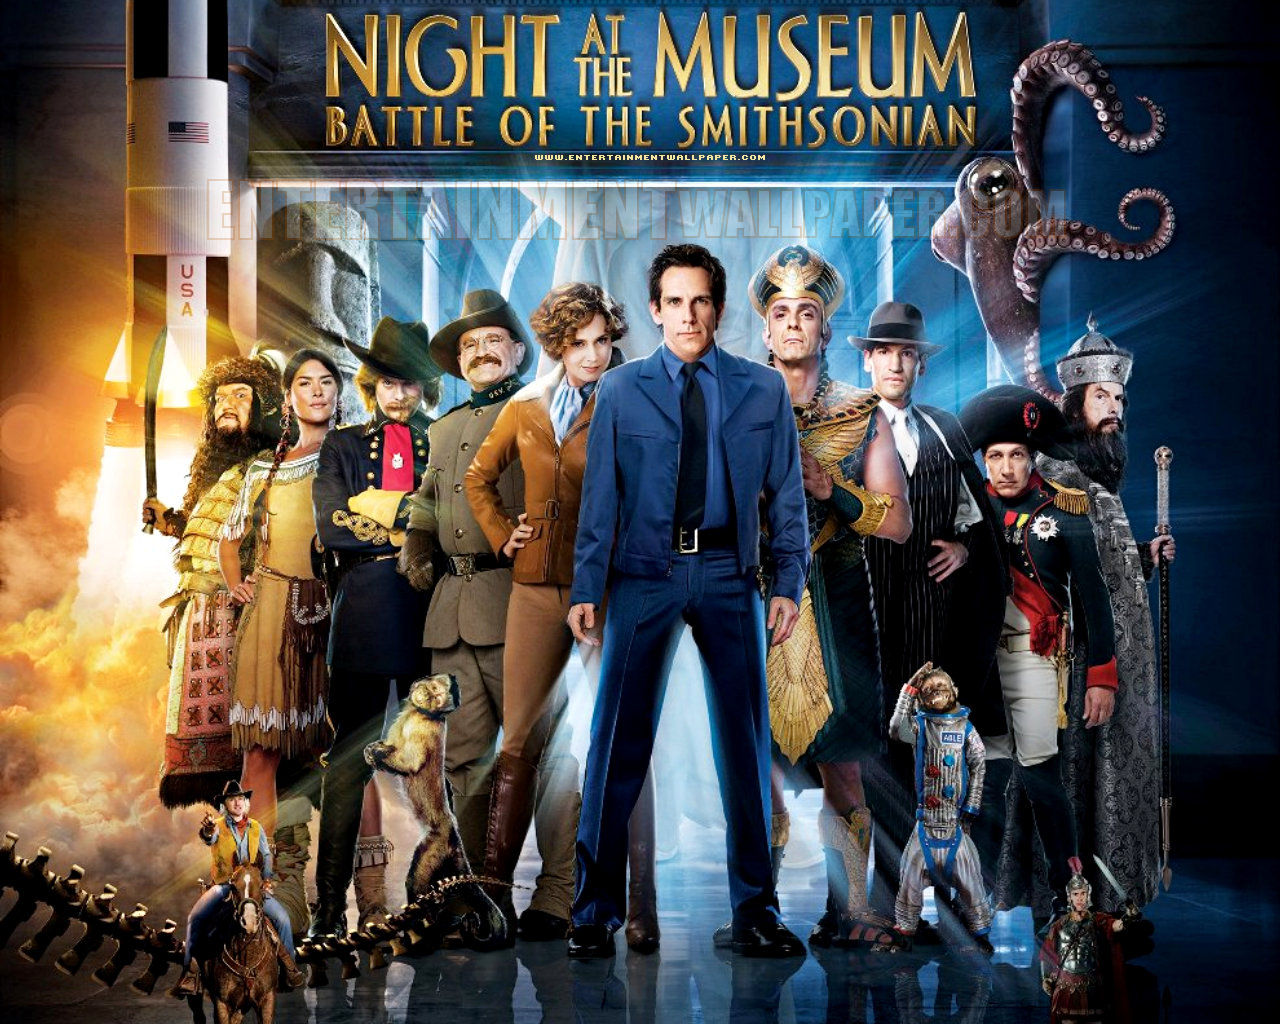 Is there a Night at the Museum 5?